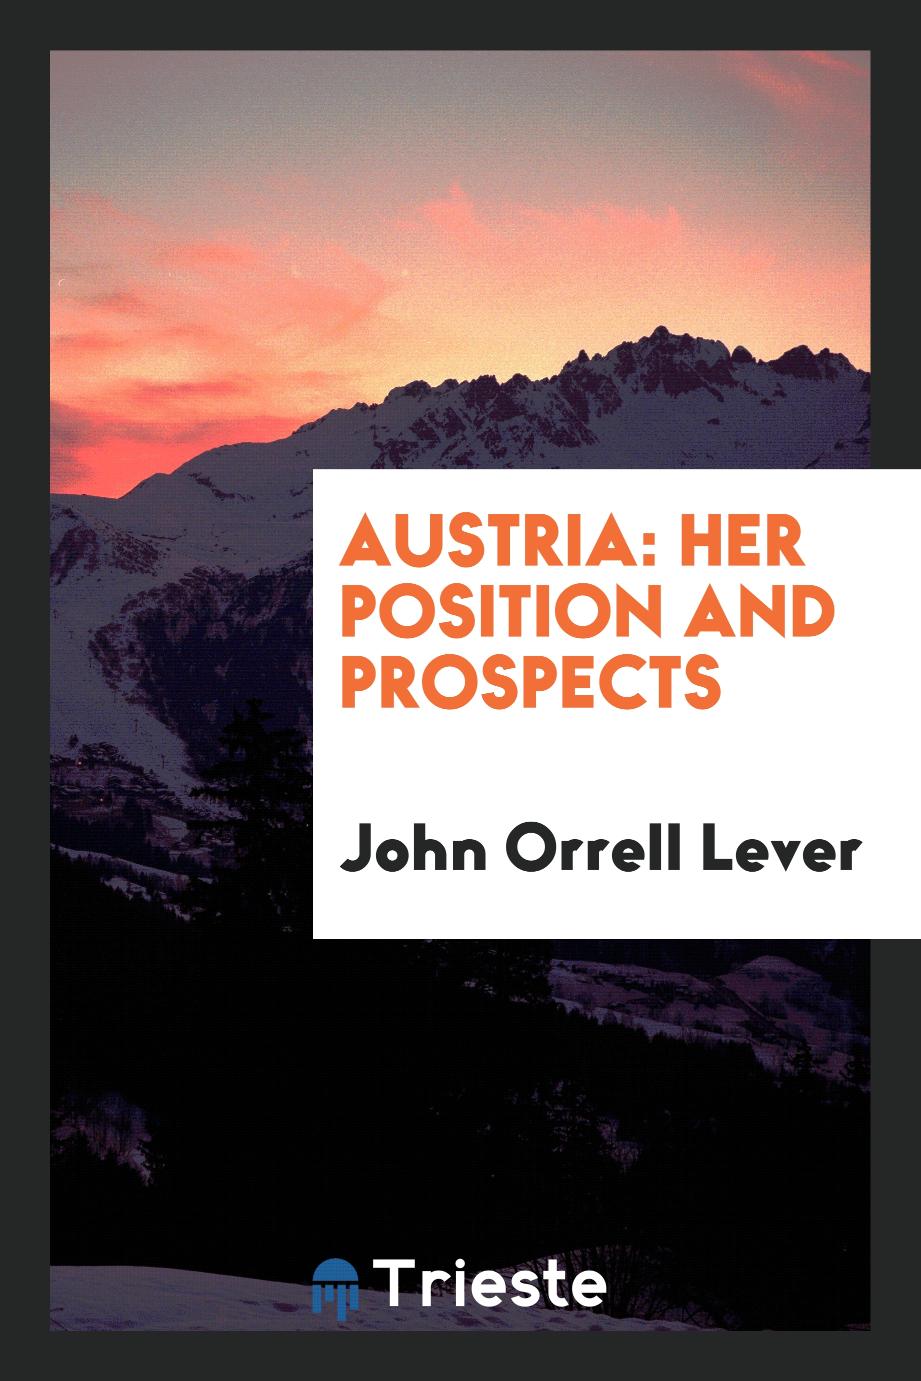 Austria: Her Position and Prospects